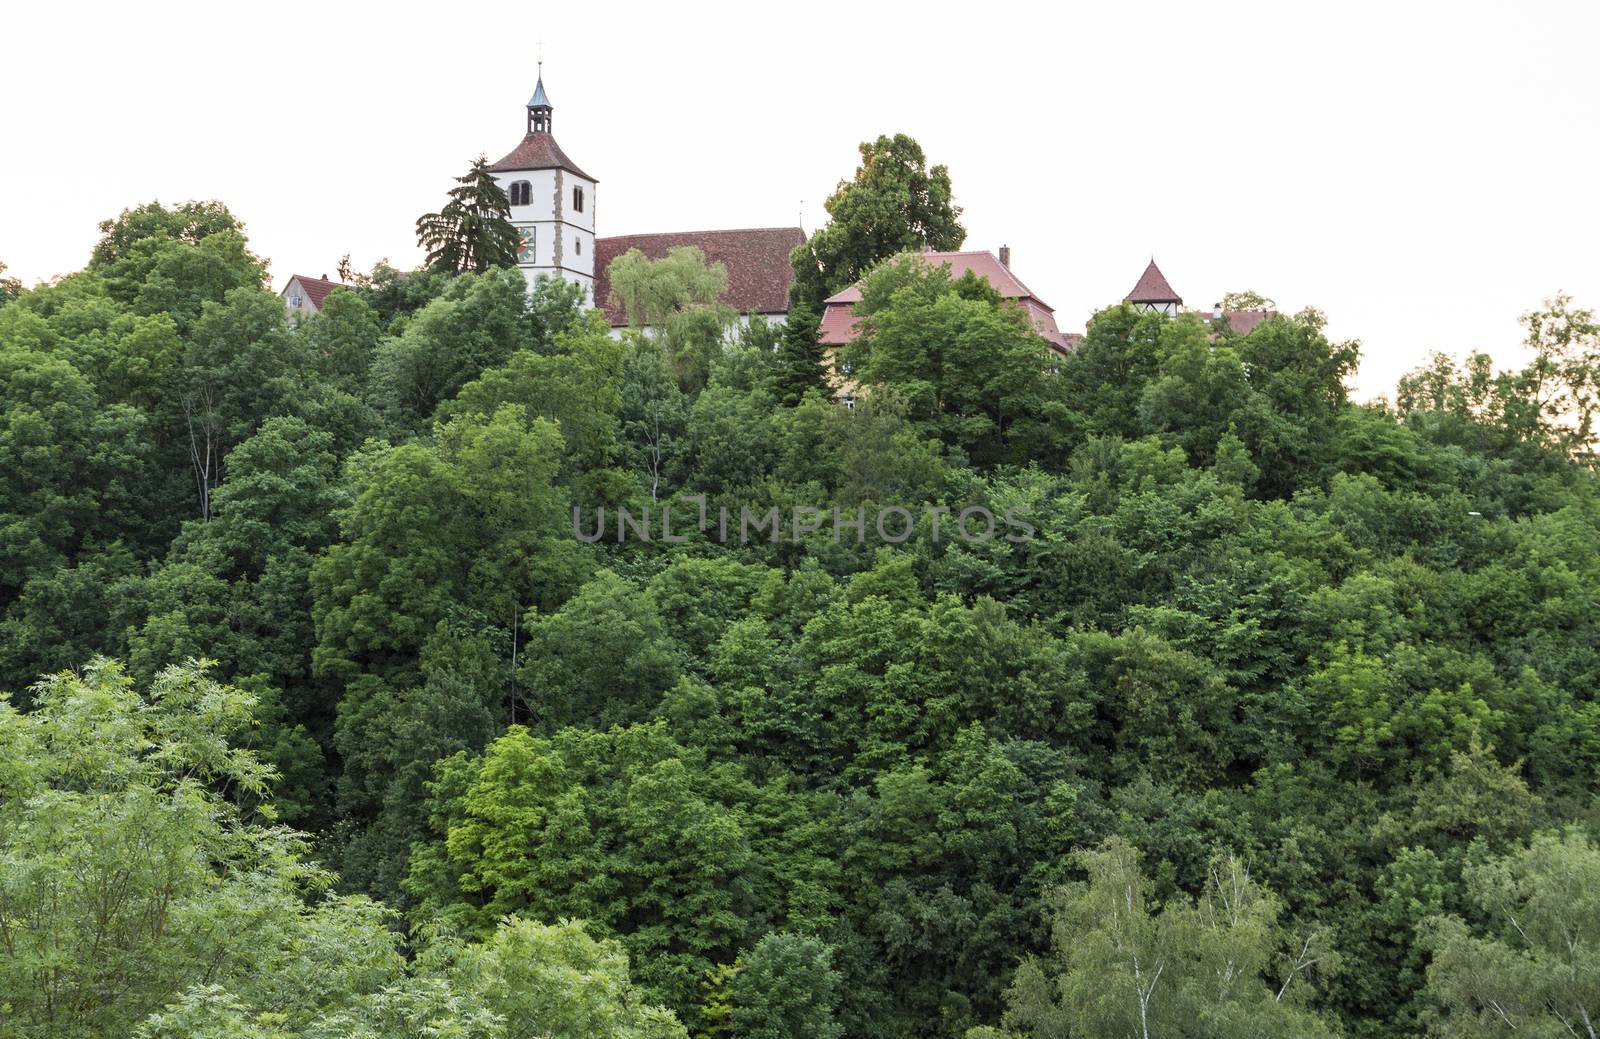 historical building in south west Germany  hidden behind trees. horizontal image